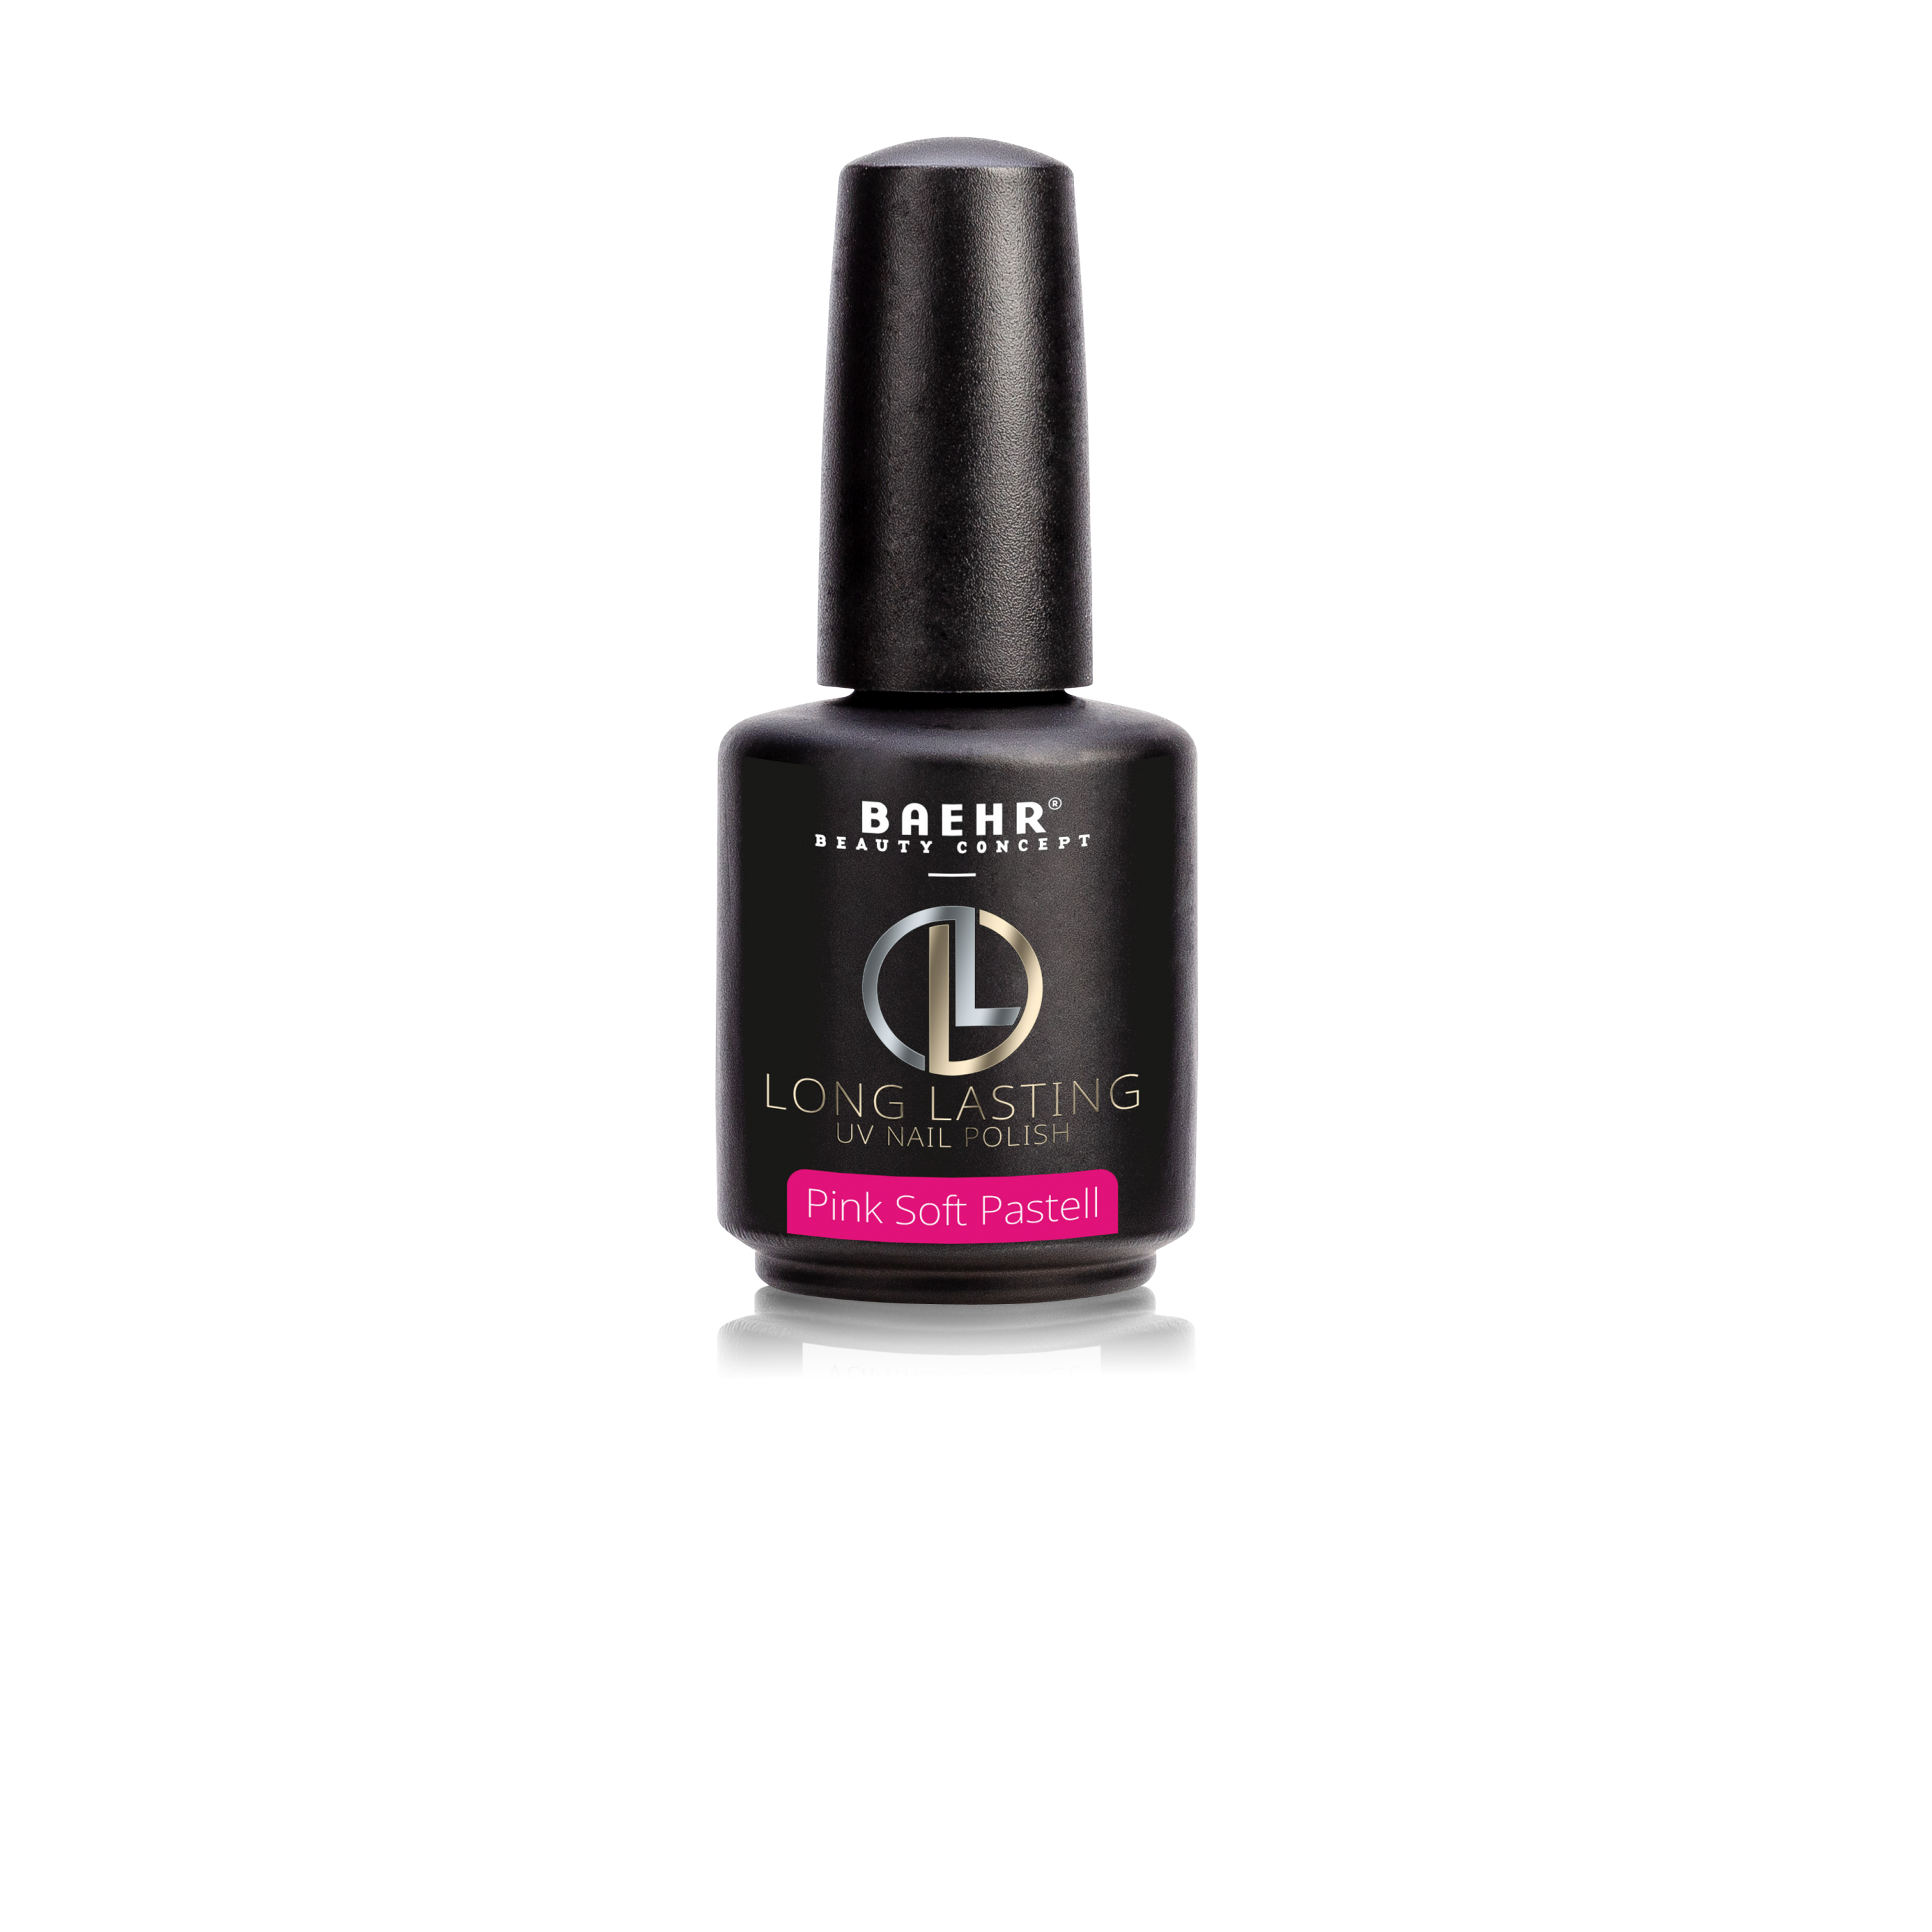 BAEHR BEAUTY CONCEPT - NAILS Long Lasting Pink Soft Pastell 13 g